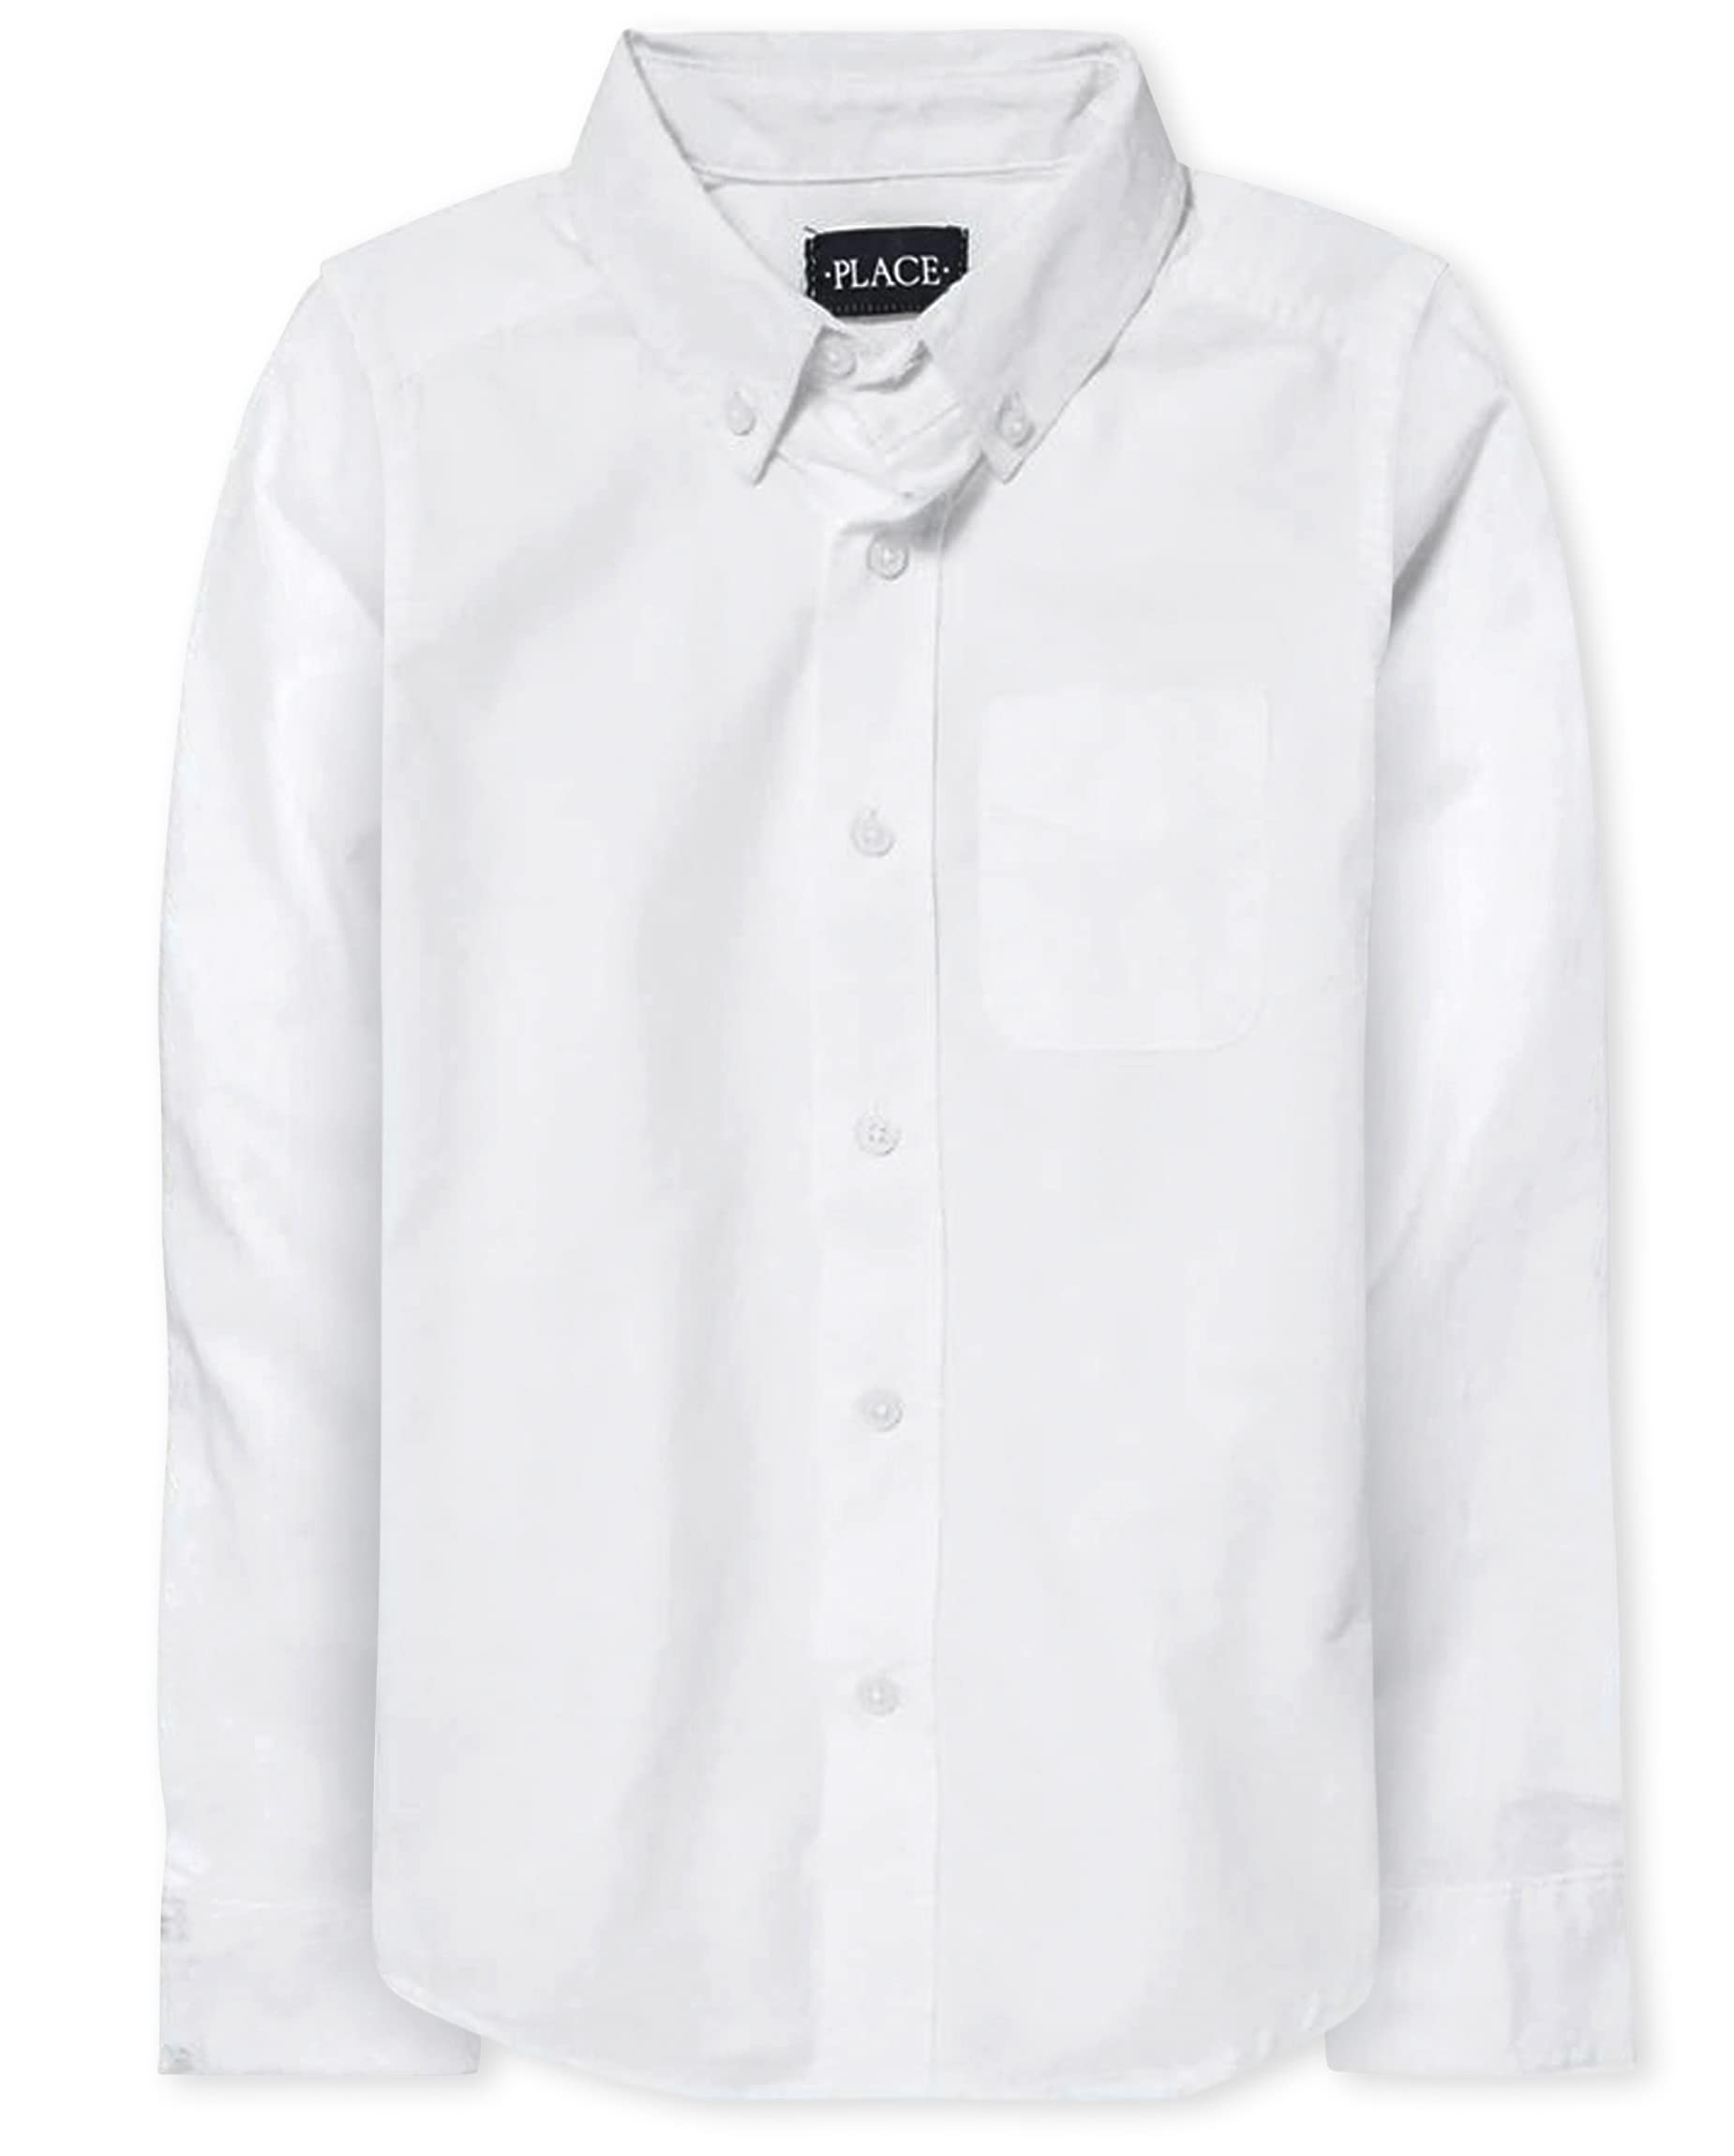 The Children's Place Boys' Long Sleeve Oxford Shirt